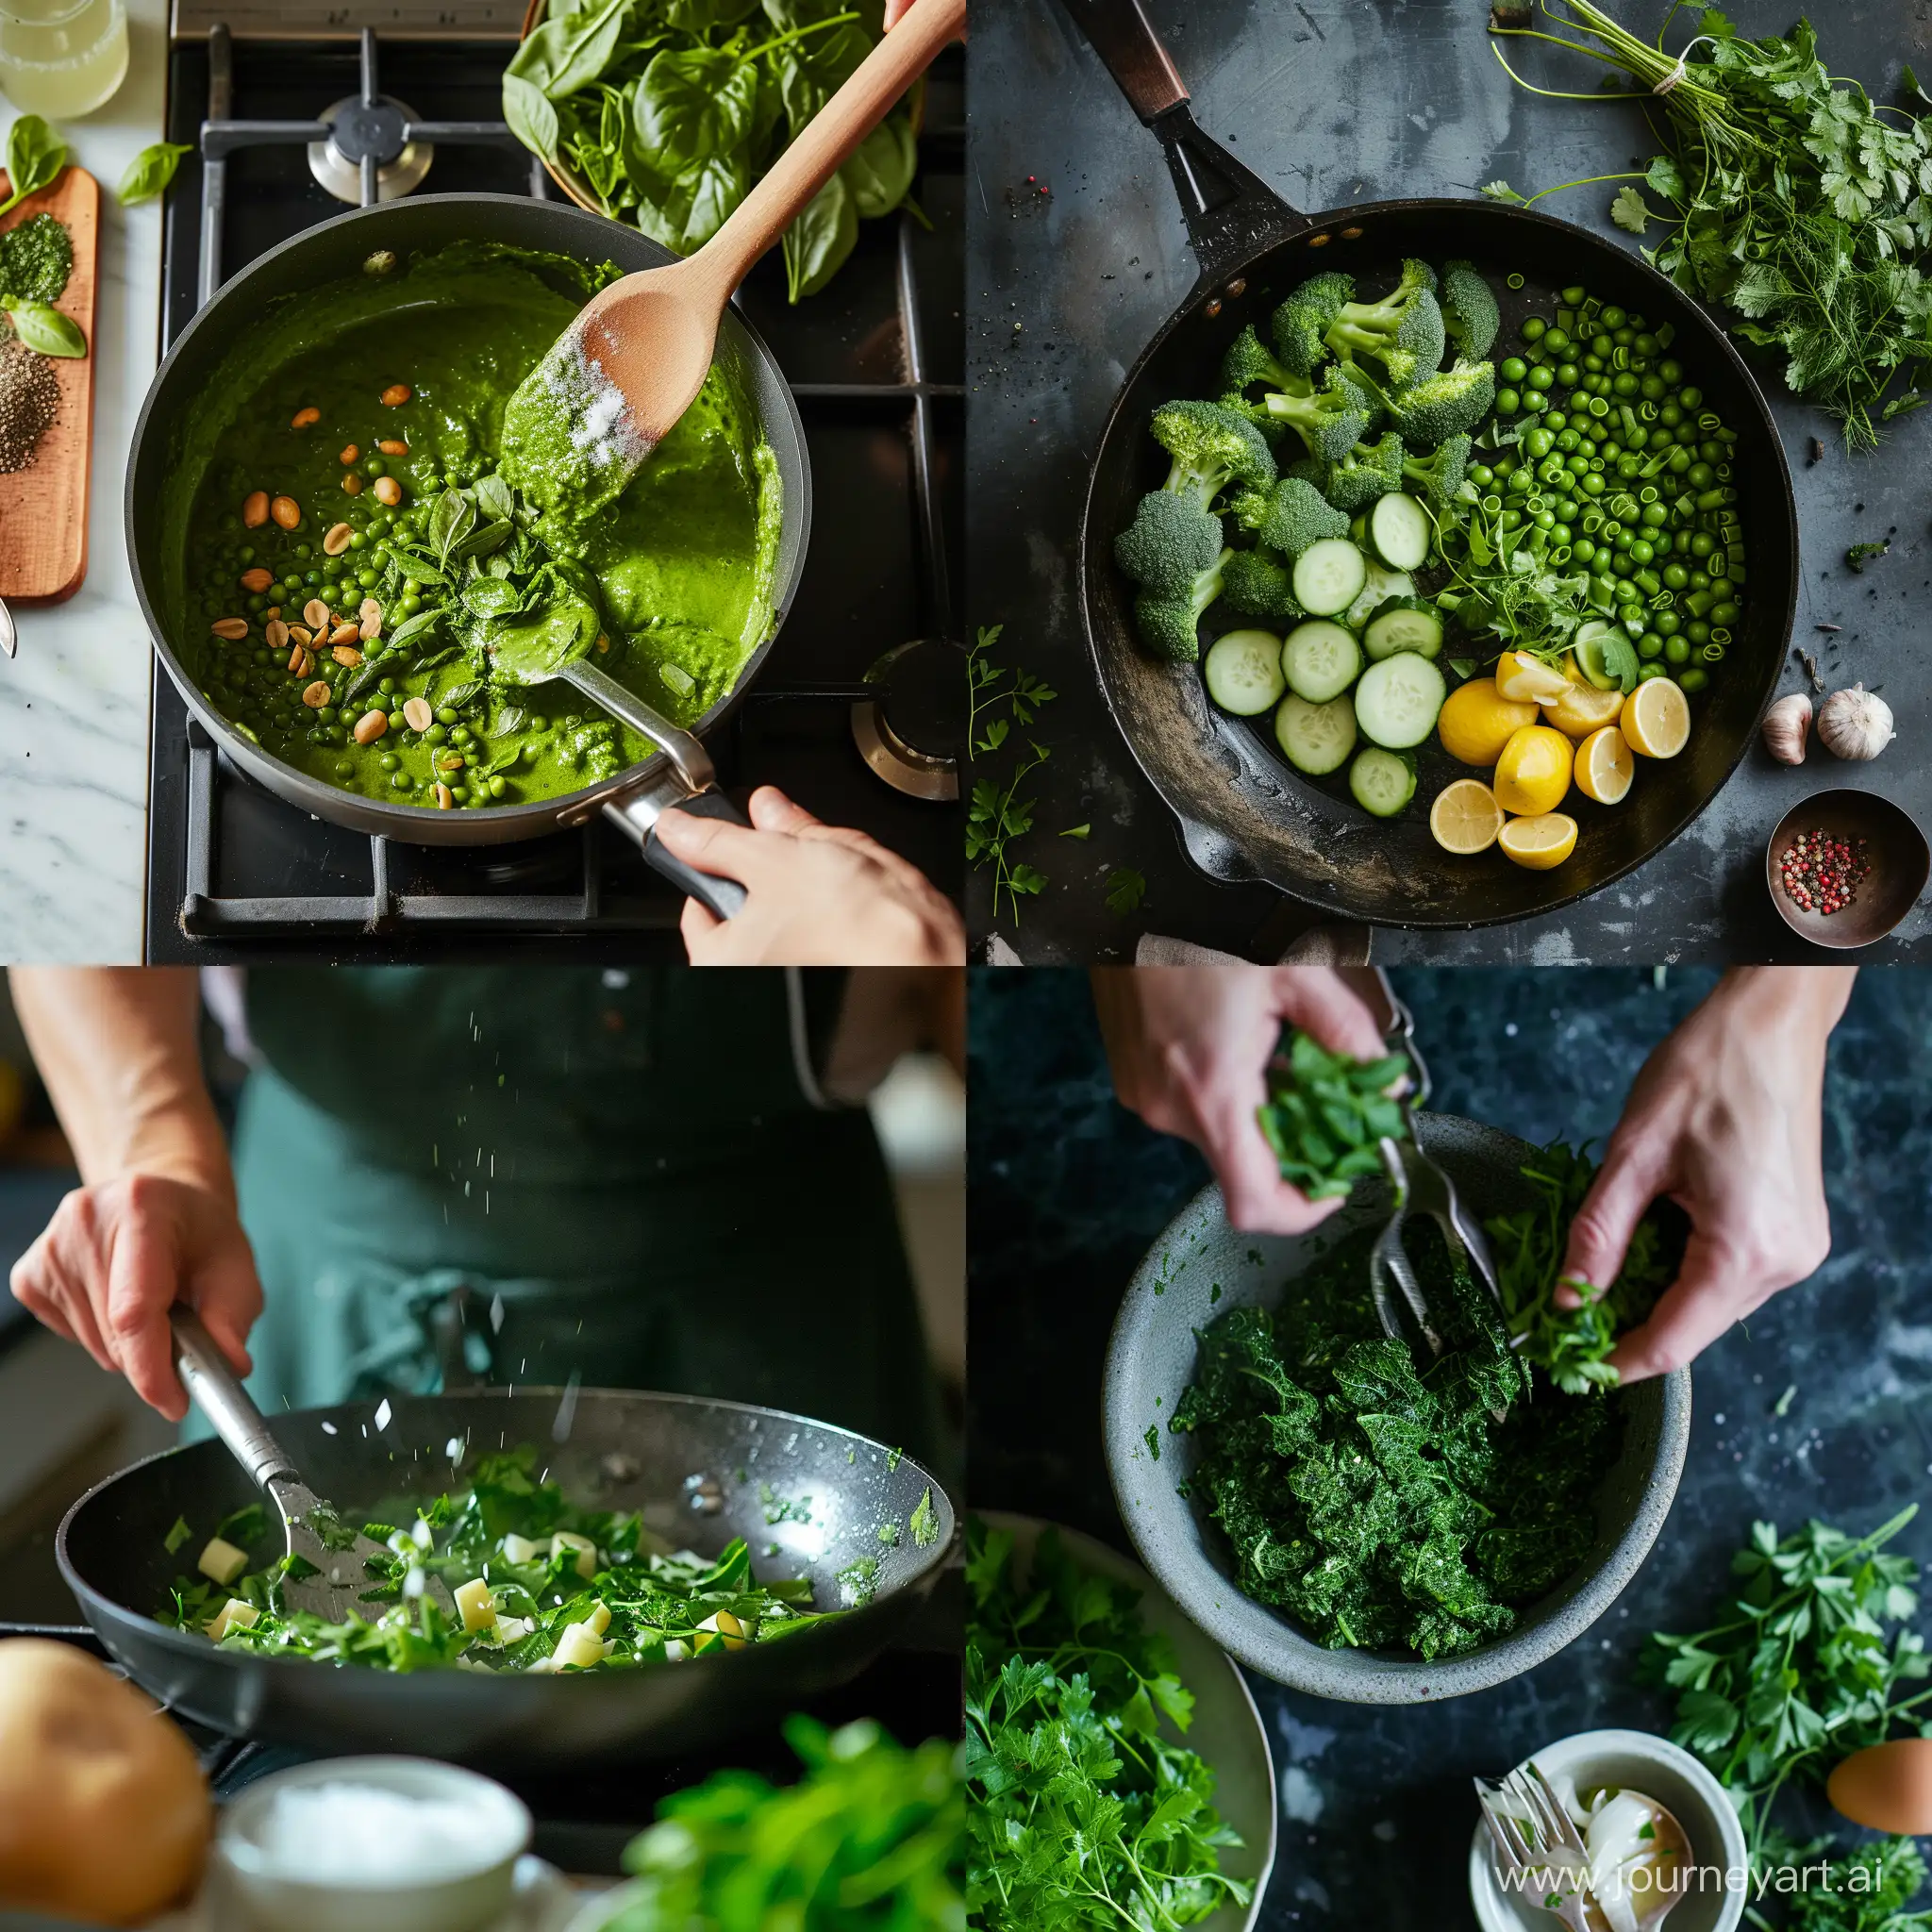 Vibrant-Square-Cooking-Green-Art